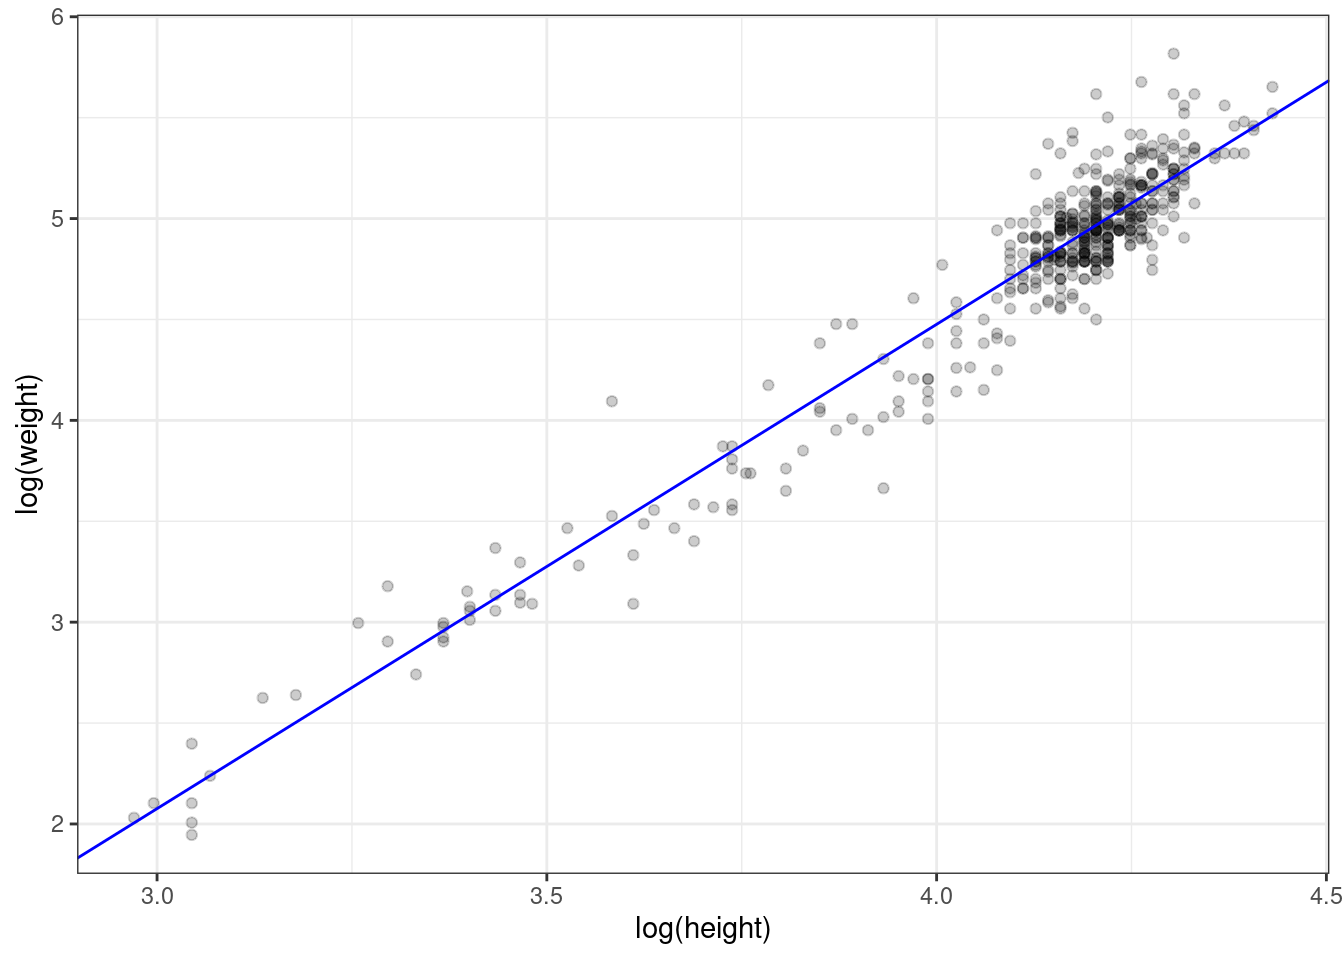 Log transformed values with superimposed regression line.